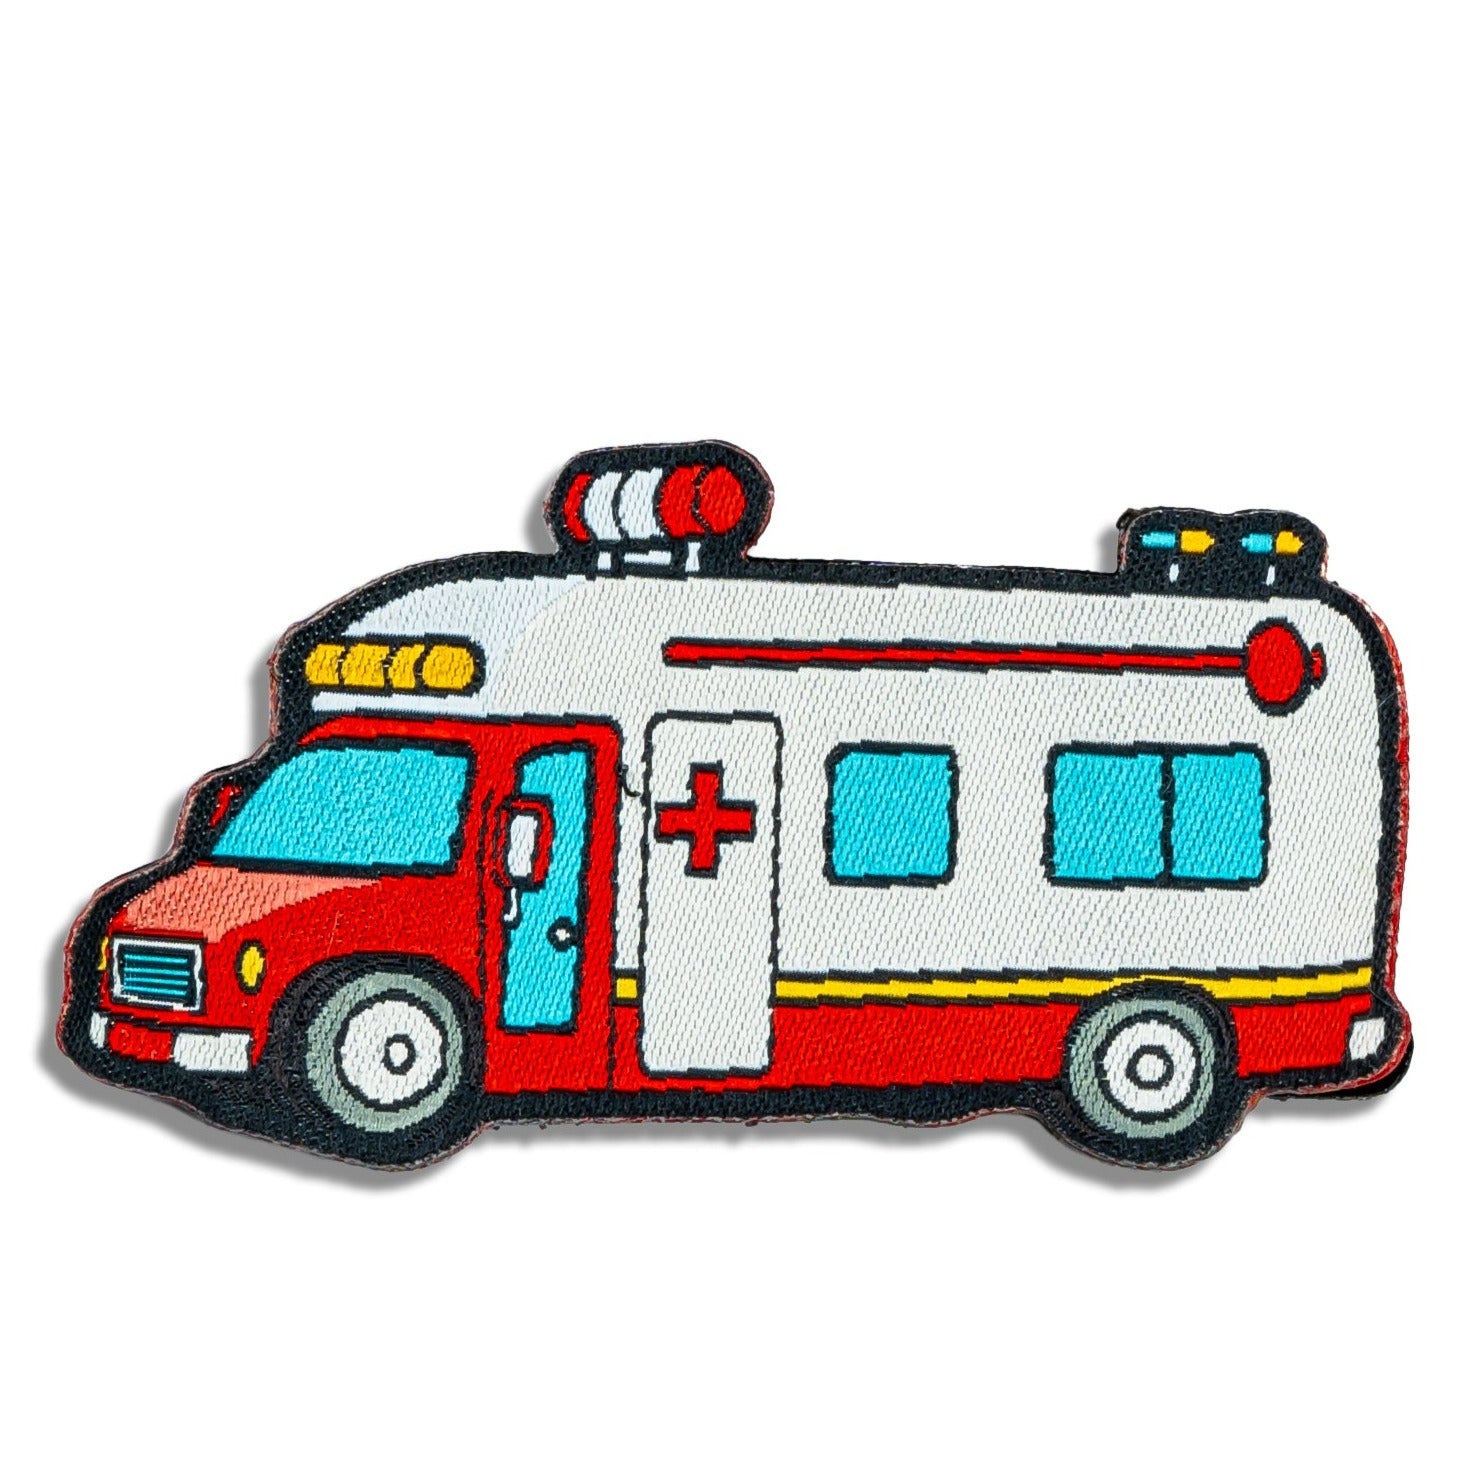 Healthcare Heroes Dabblz Patch Pack